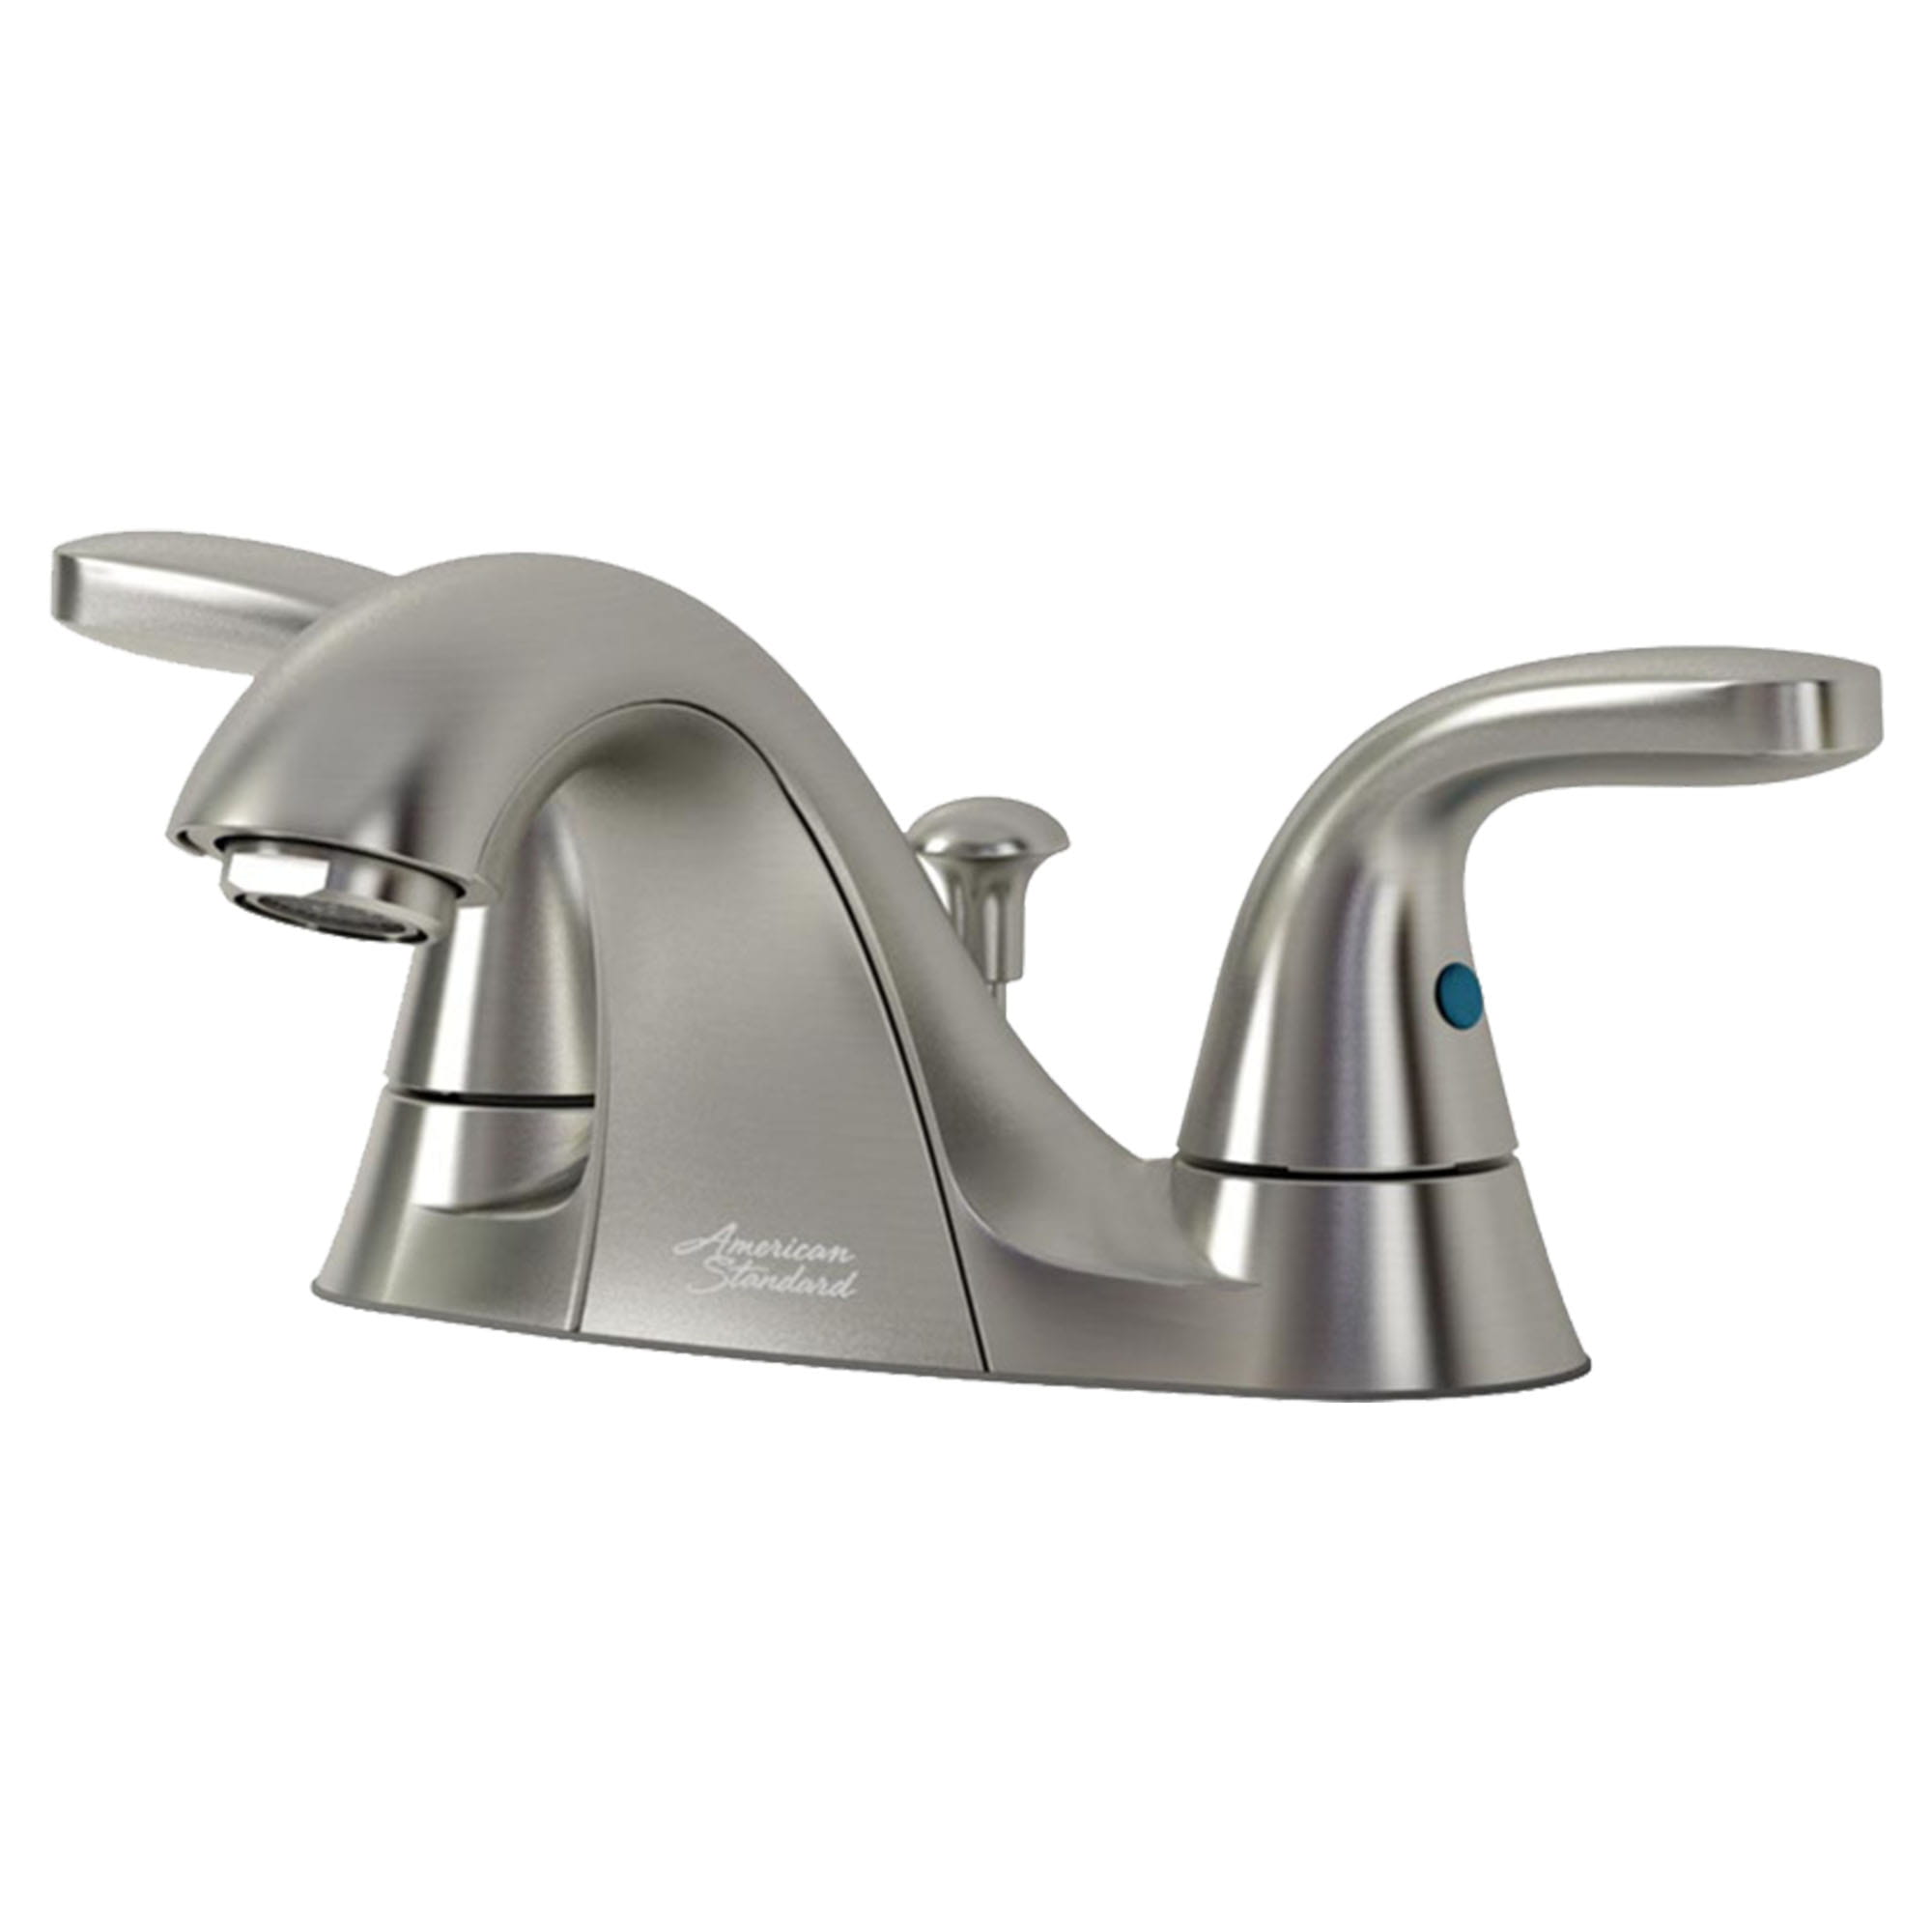 Cadet 20 GPM 4 In Centerset 2 Handle Bathroom Faucet 12 GPM with Plastic Drain   BRUSHED NICKEL